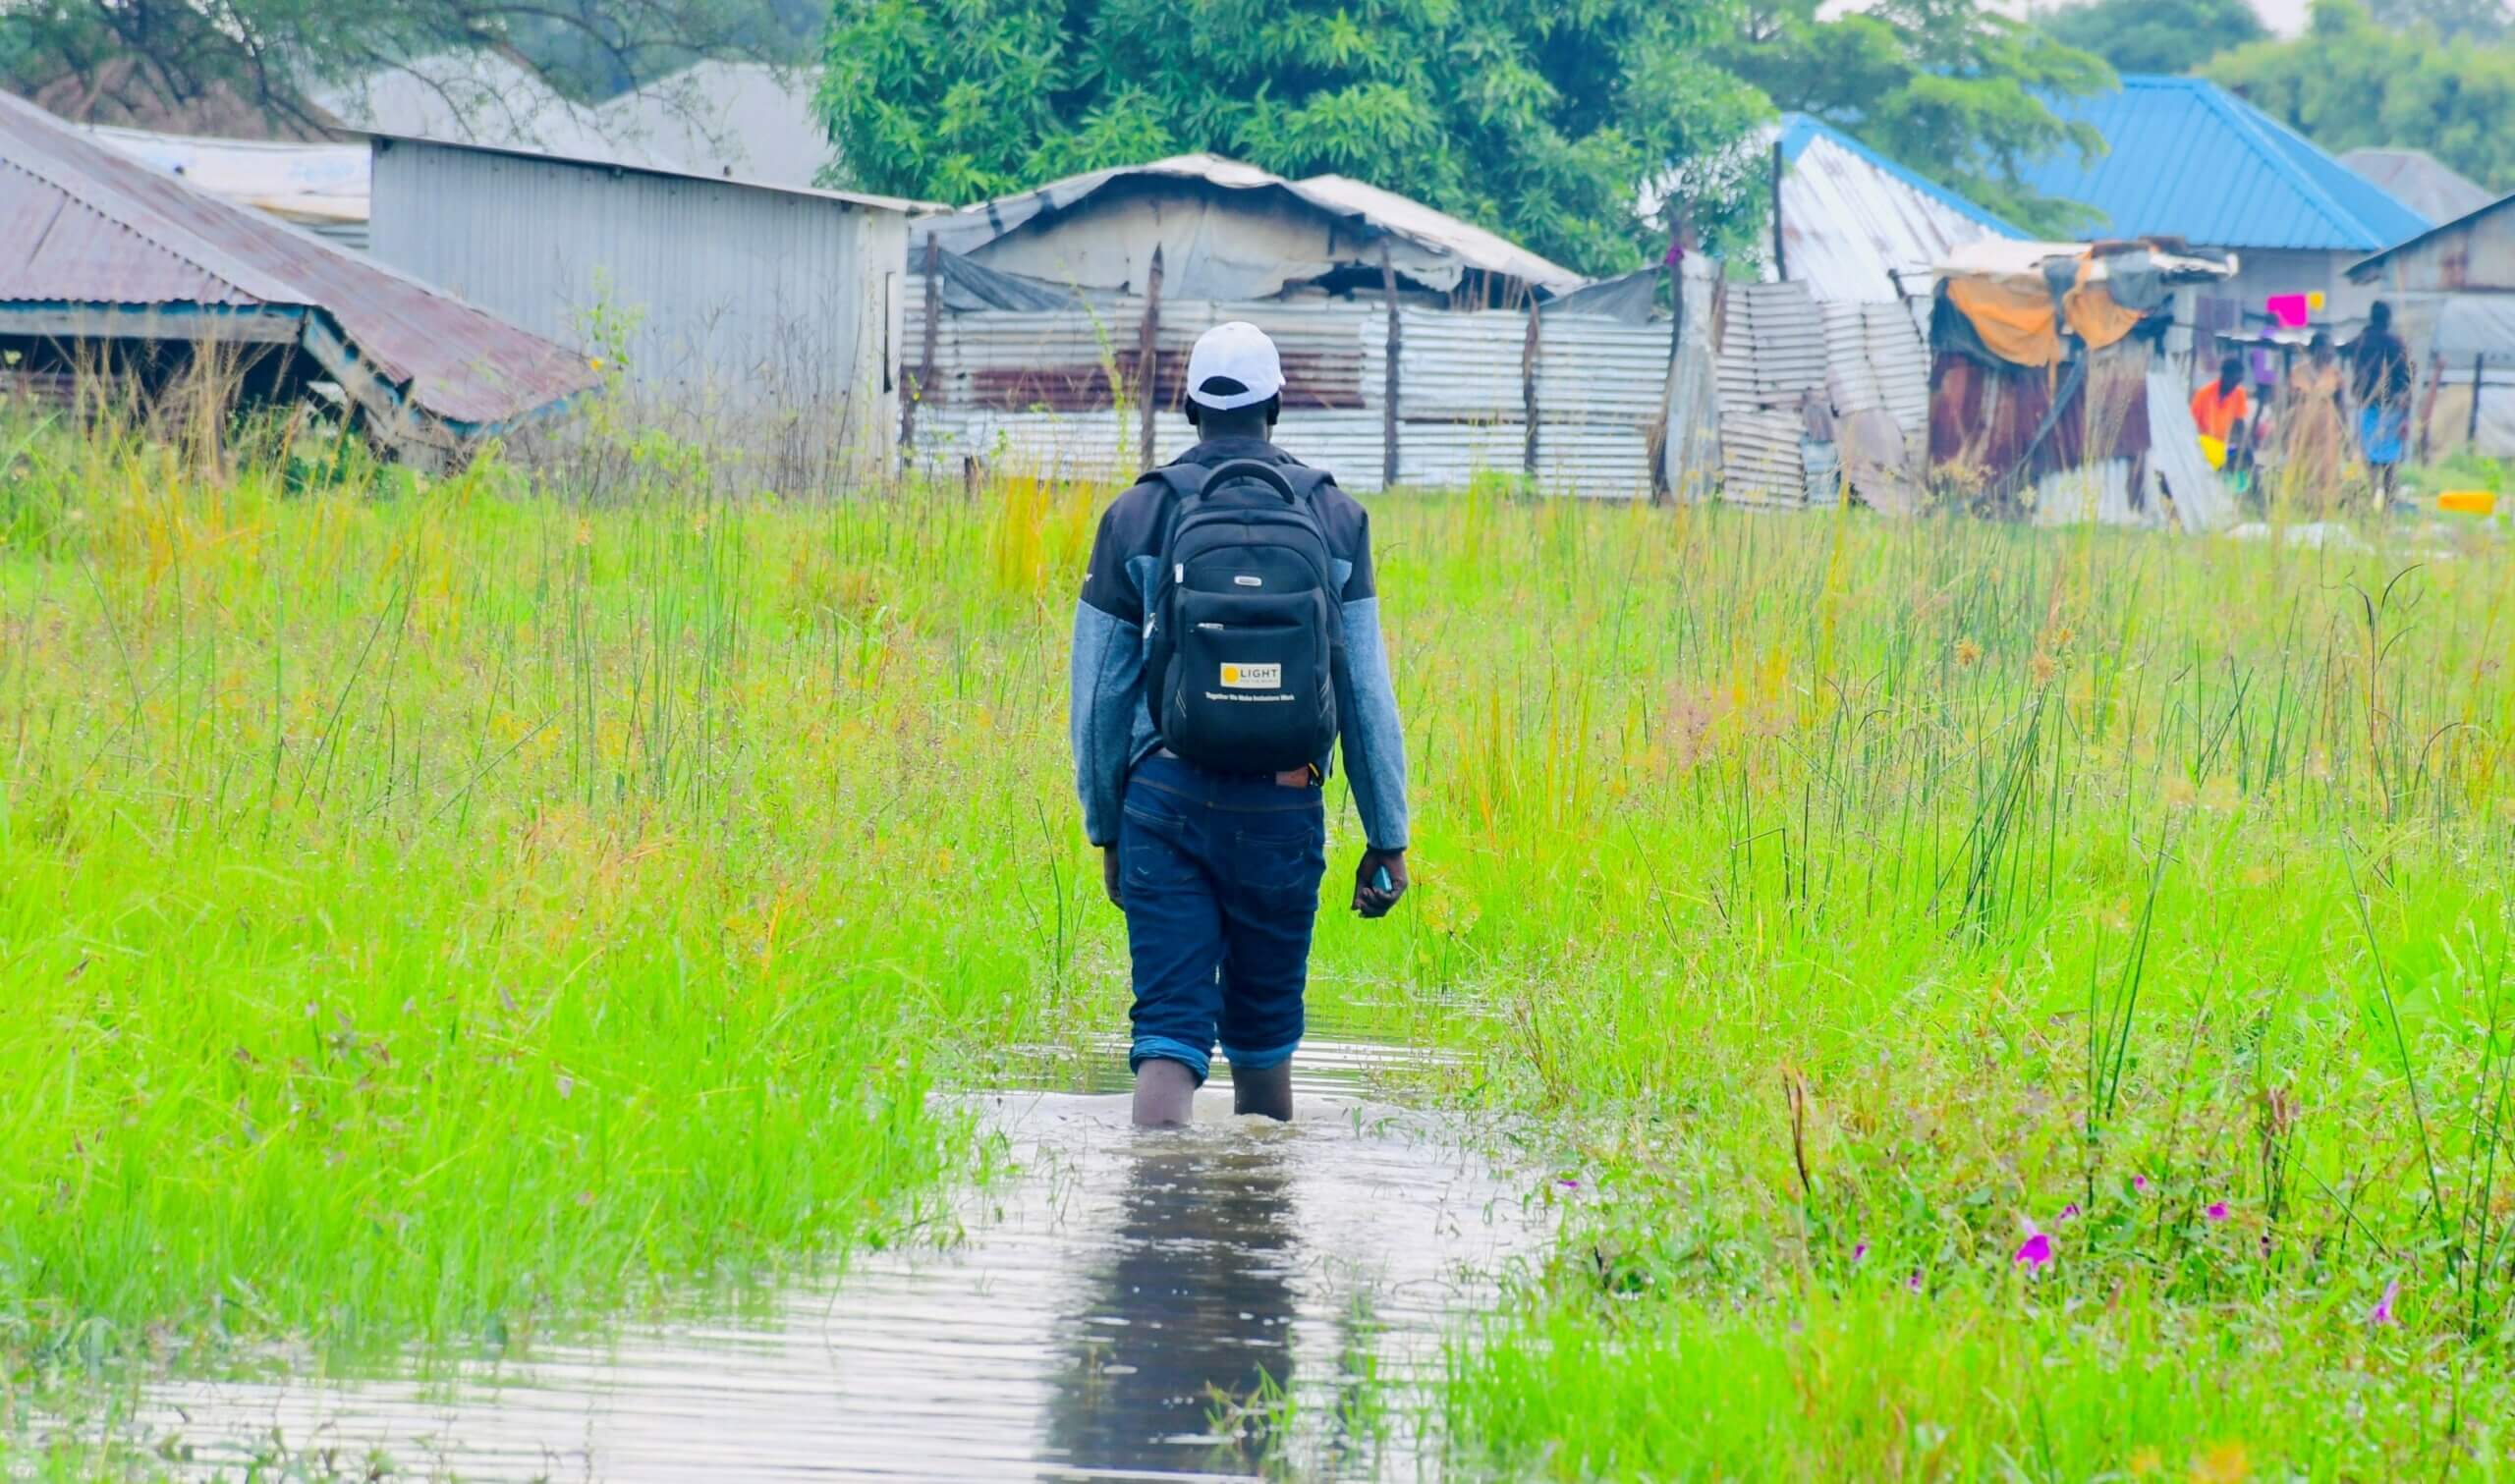 Image of Daniel Anyang, a Disability Inclusion Facilitator at Light for the World, visiting flooded communities in Jonglei state in South Sudan. Daniel has his back to the camera and is walking towards homes. He is walking through a flooded area of grassland. The water is just below his knees.